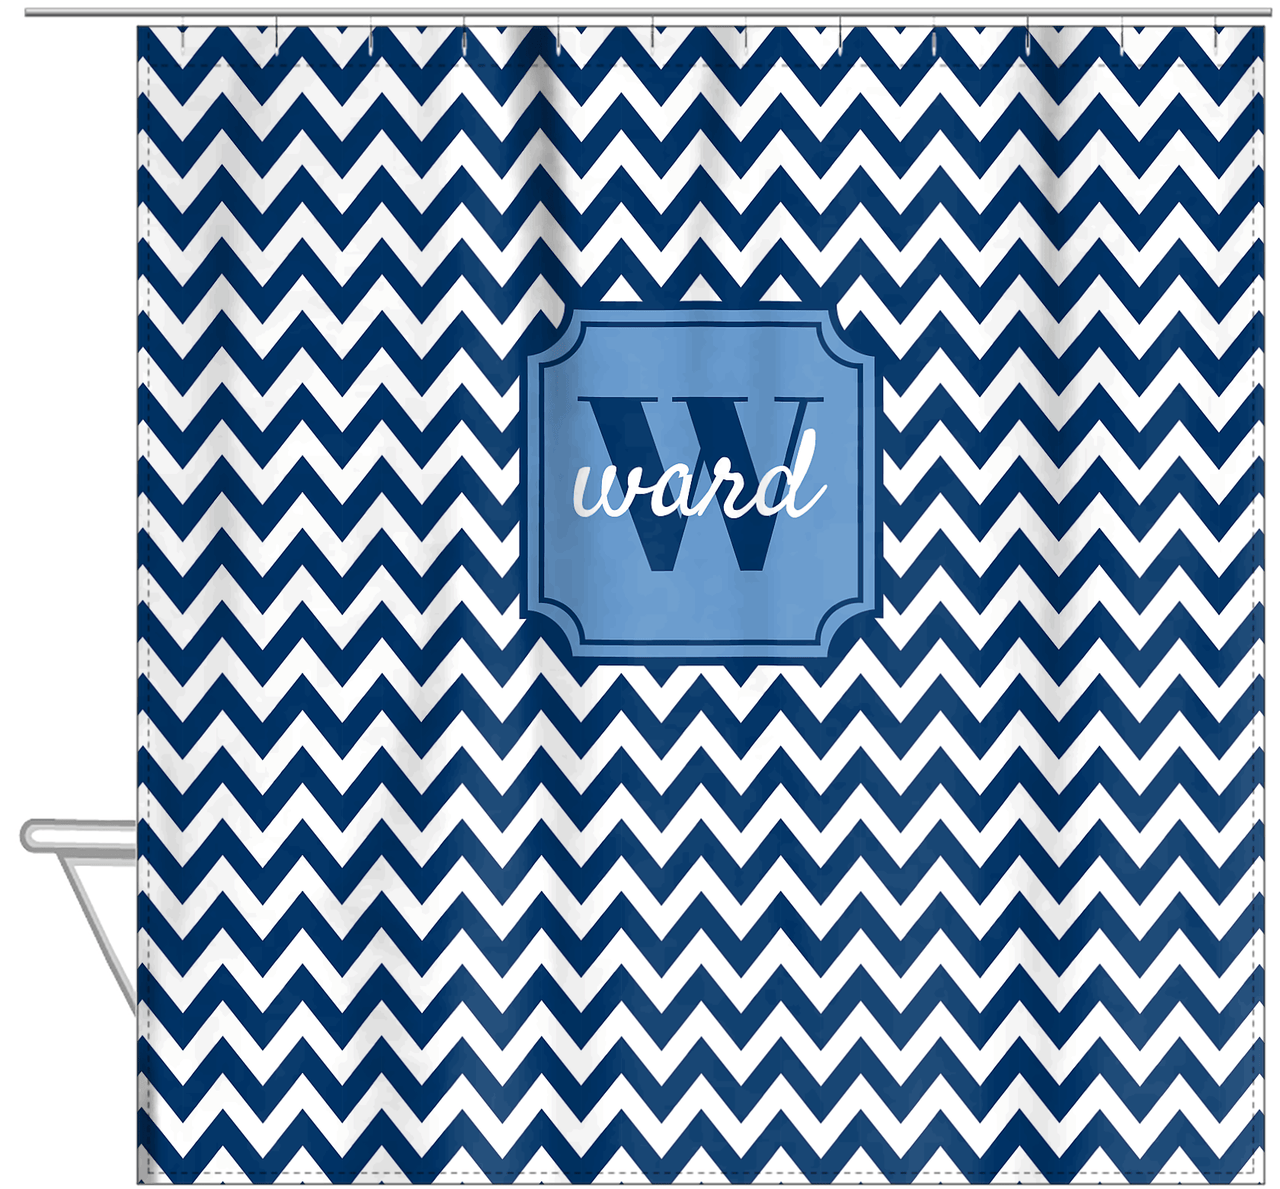 Personalized Chevron Shower Curtain II - Blue and White - Stamp Nameplate - Hanging View